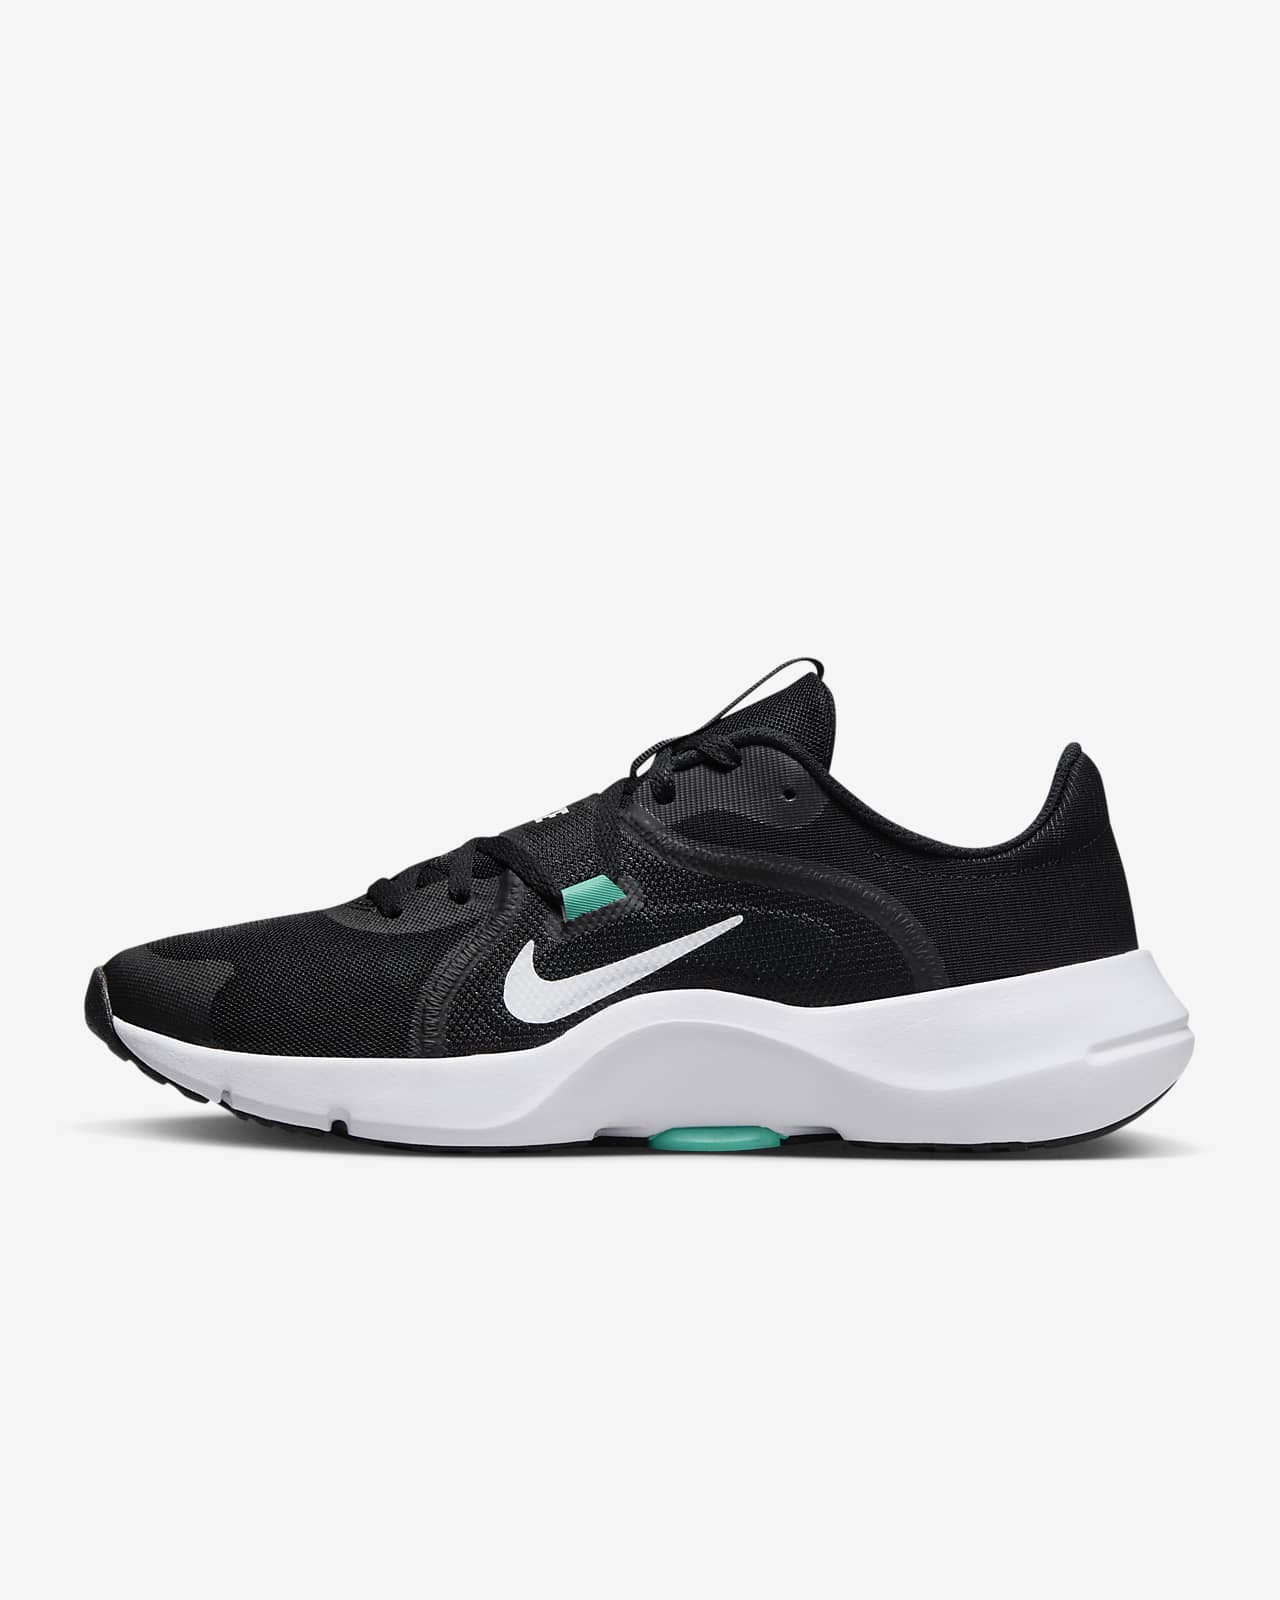 Nike Sale. Score Up To 50% Off. Nike IE